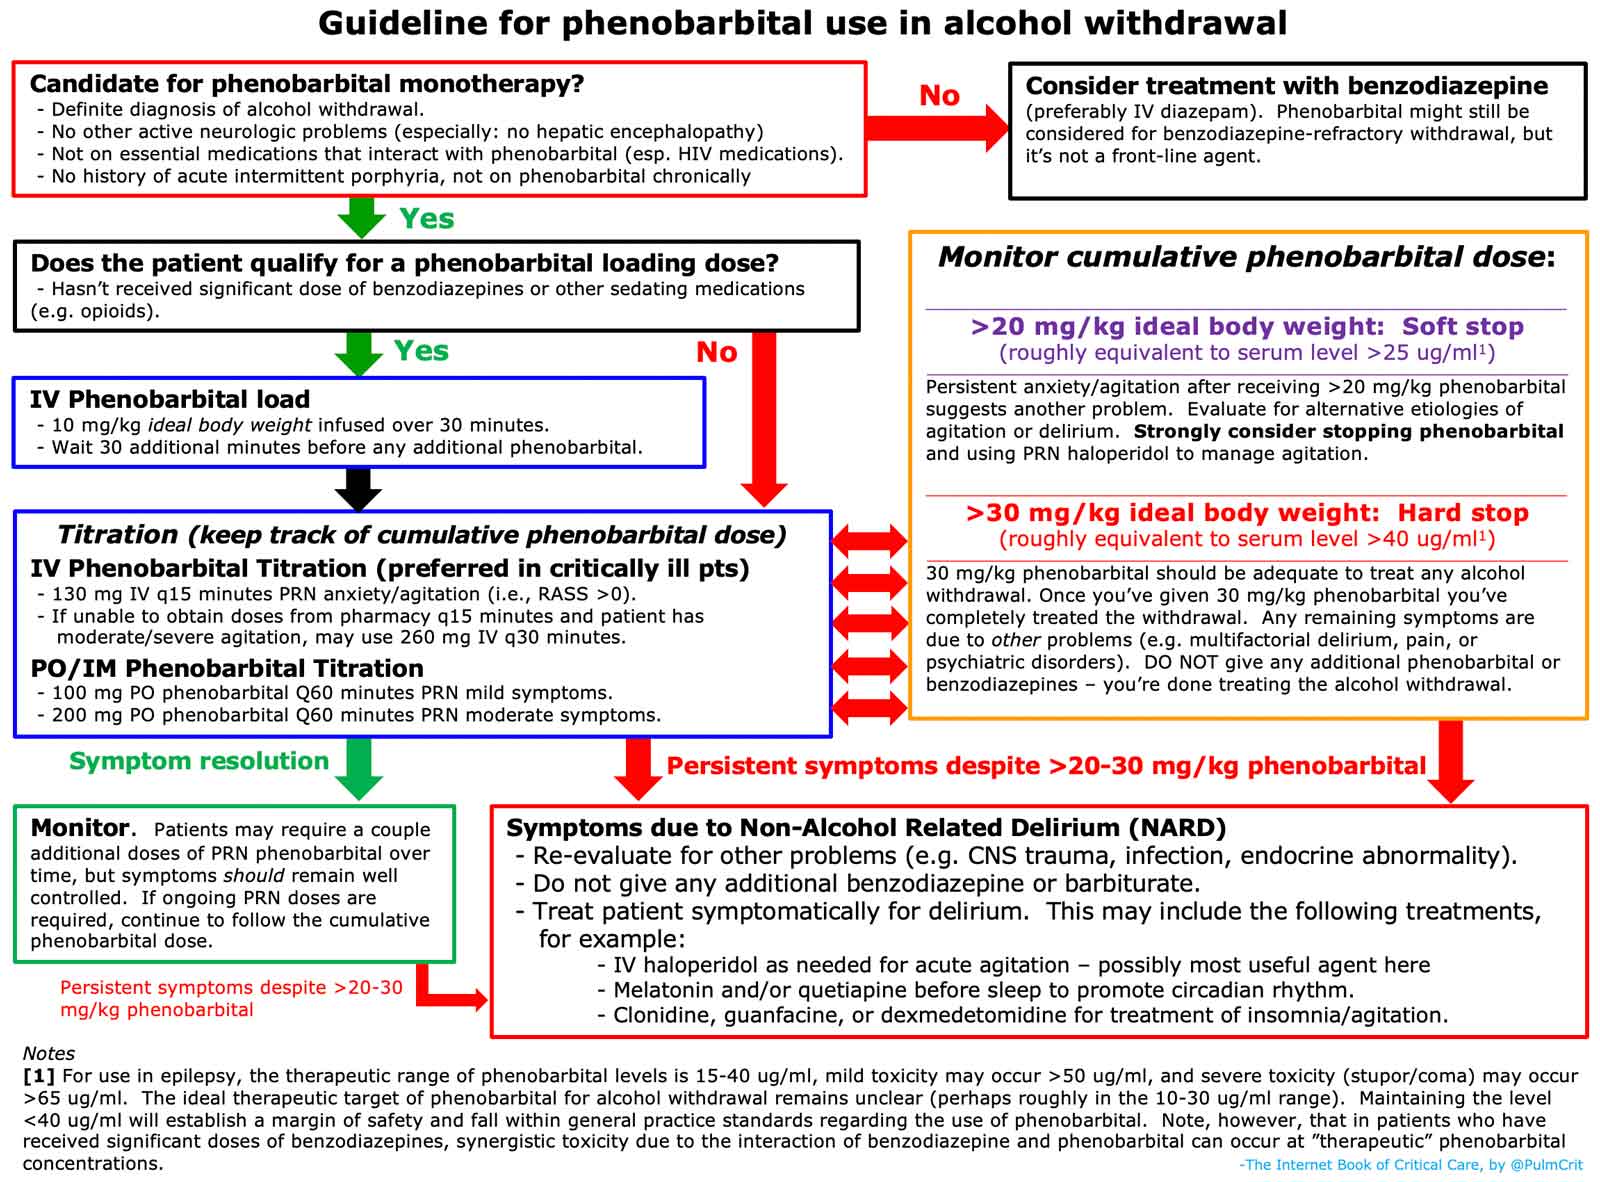 𝙟𝙤𝙨𝙝 𝙛𝙖𝙧𝙠𝙖𝙨 And Now Another Iv Diazepam Shortage If You Re Still Using Benzodiazepines For Alcohol Withdrawal This Is A Good Time To Try Phenobarbital Monotherapy Here S What You Need